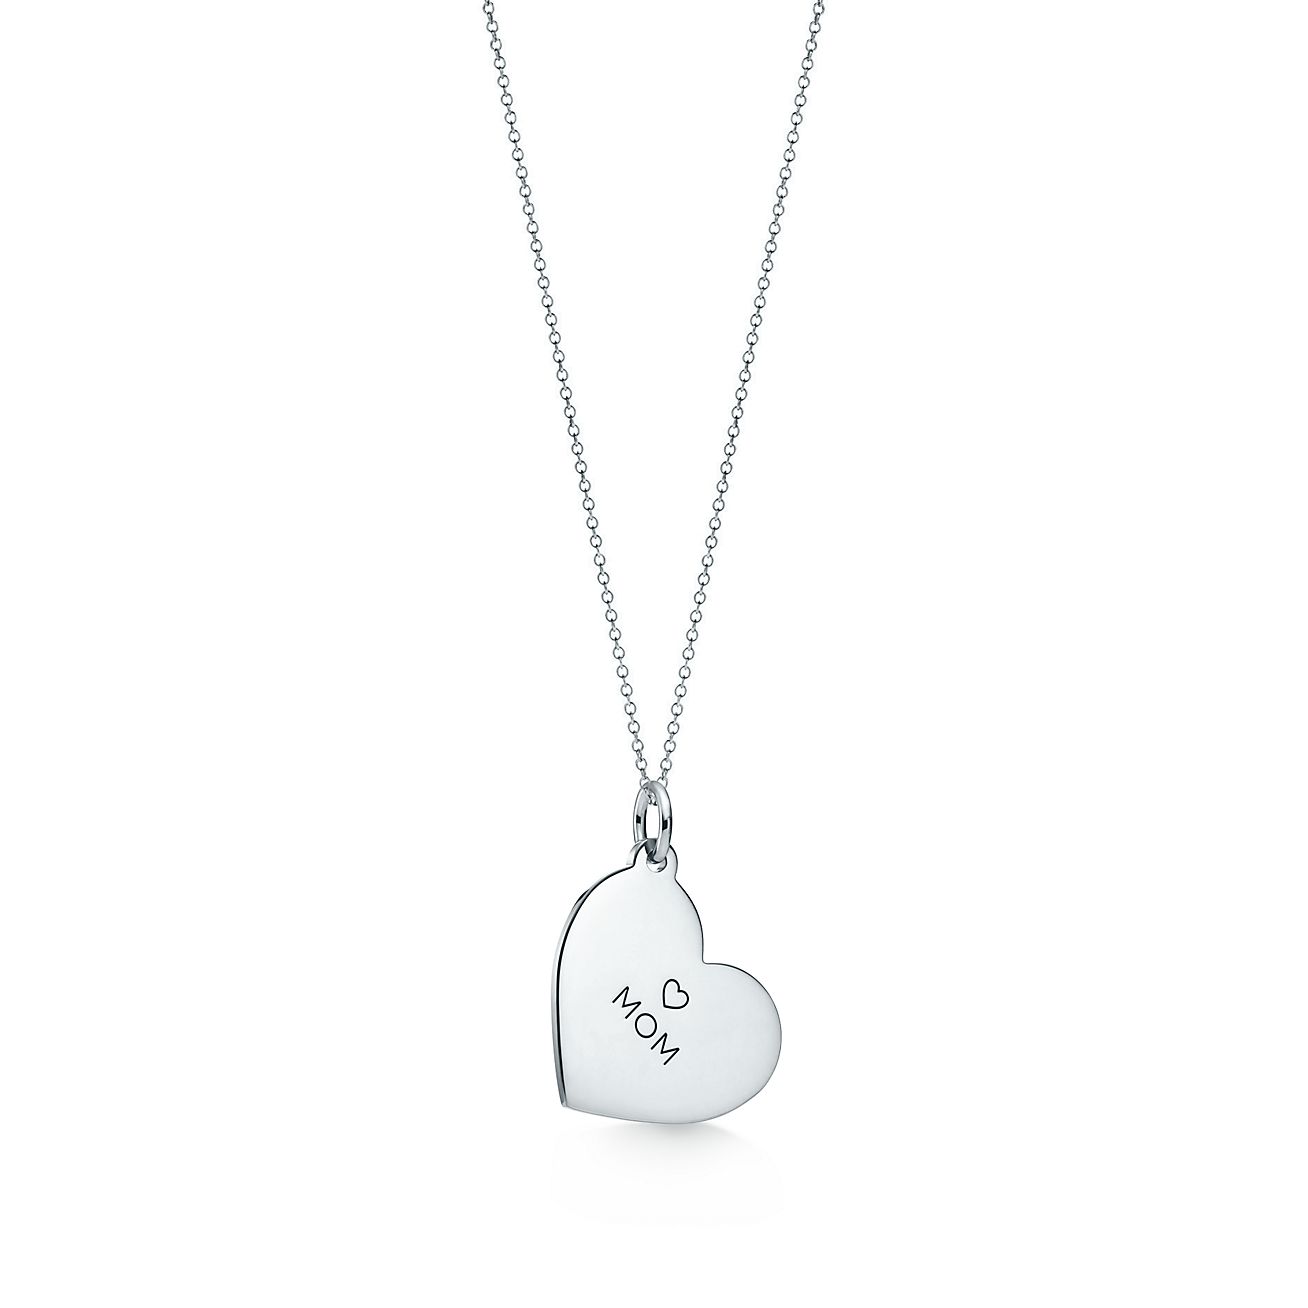 Beiver I LOVE YOU MOM Necklace for Great Mother's Gifts 